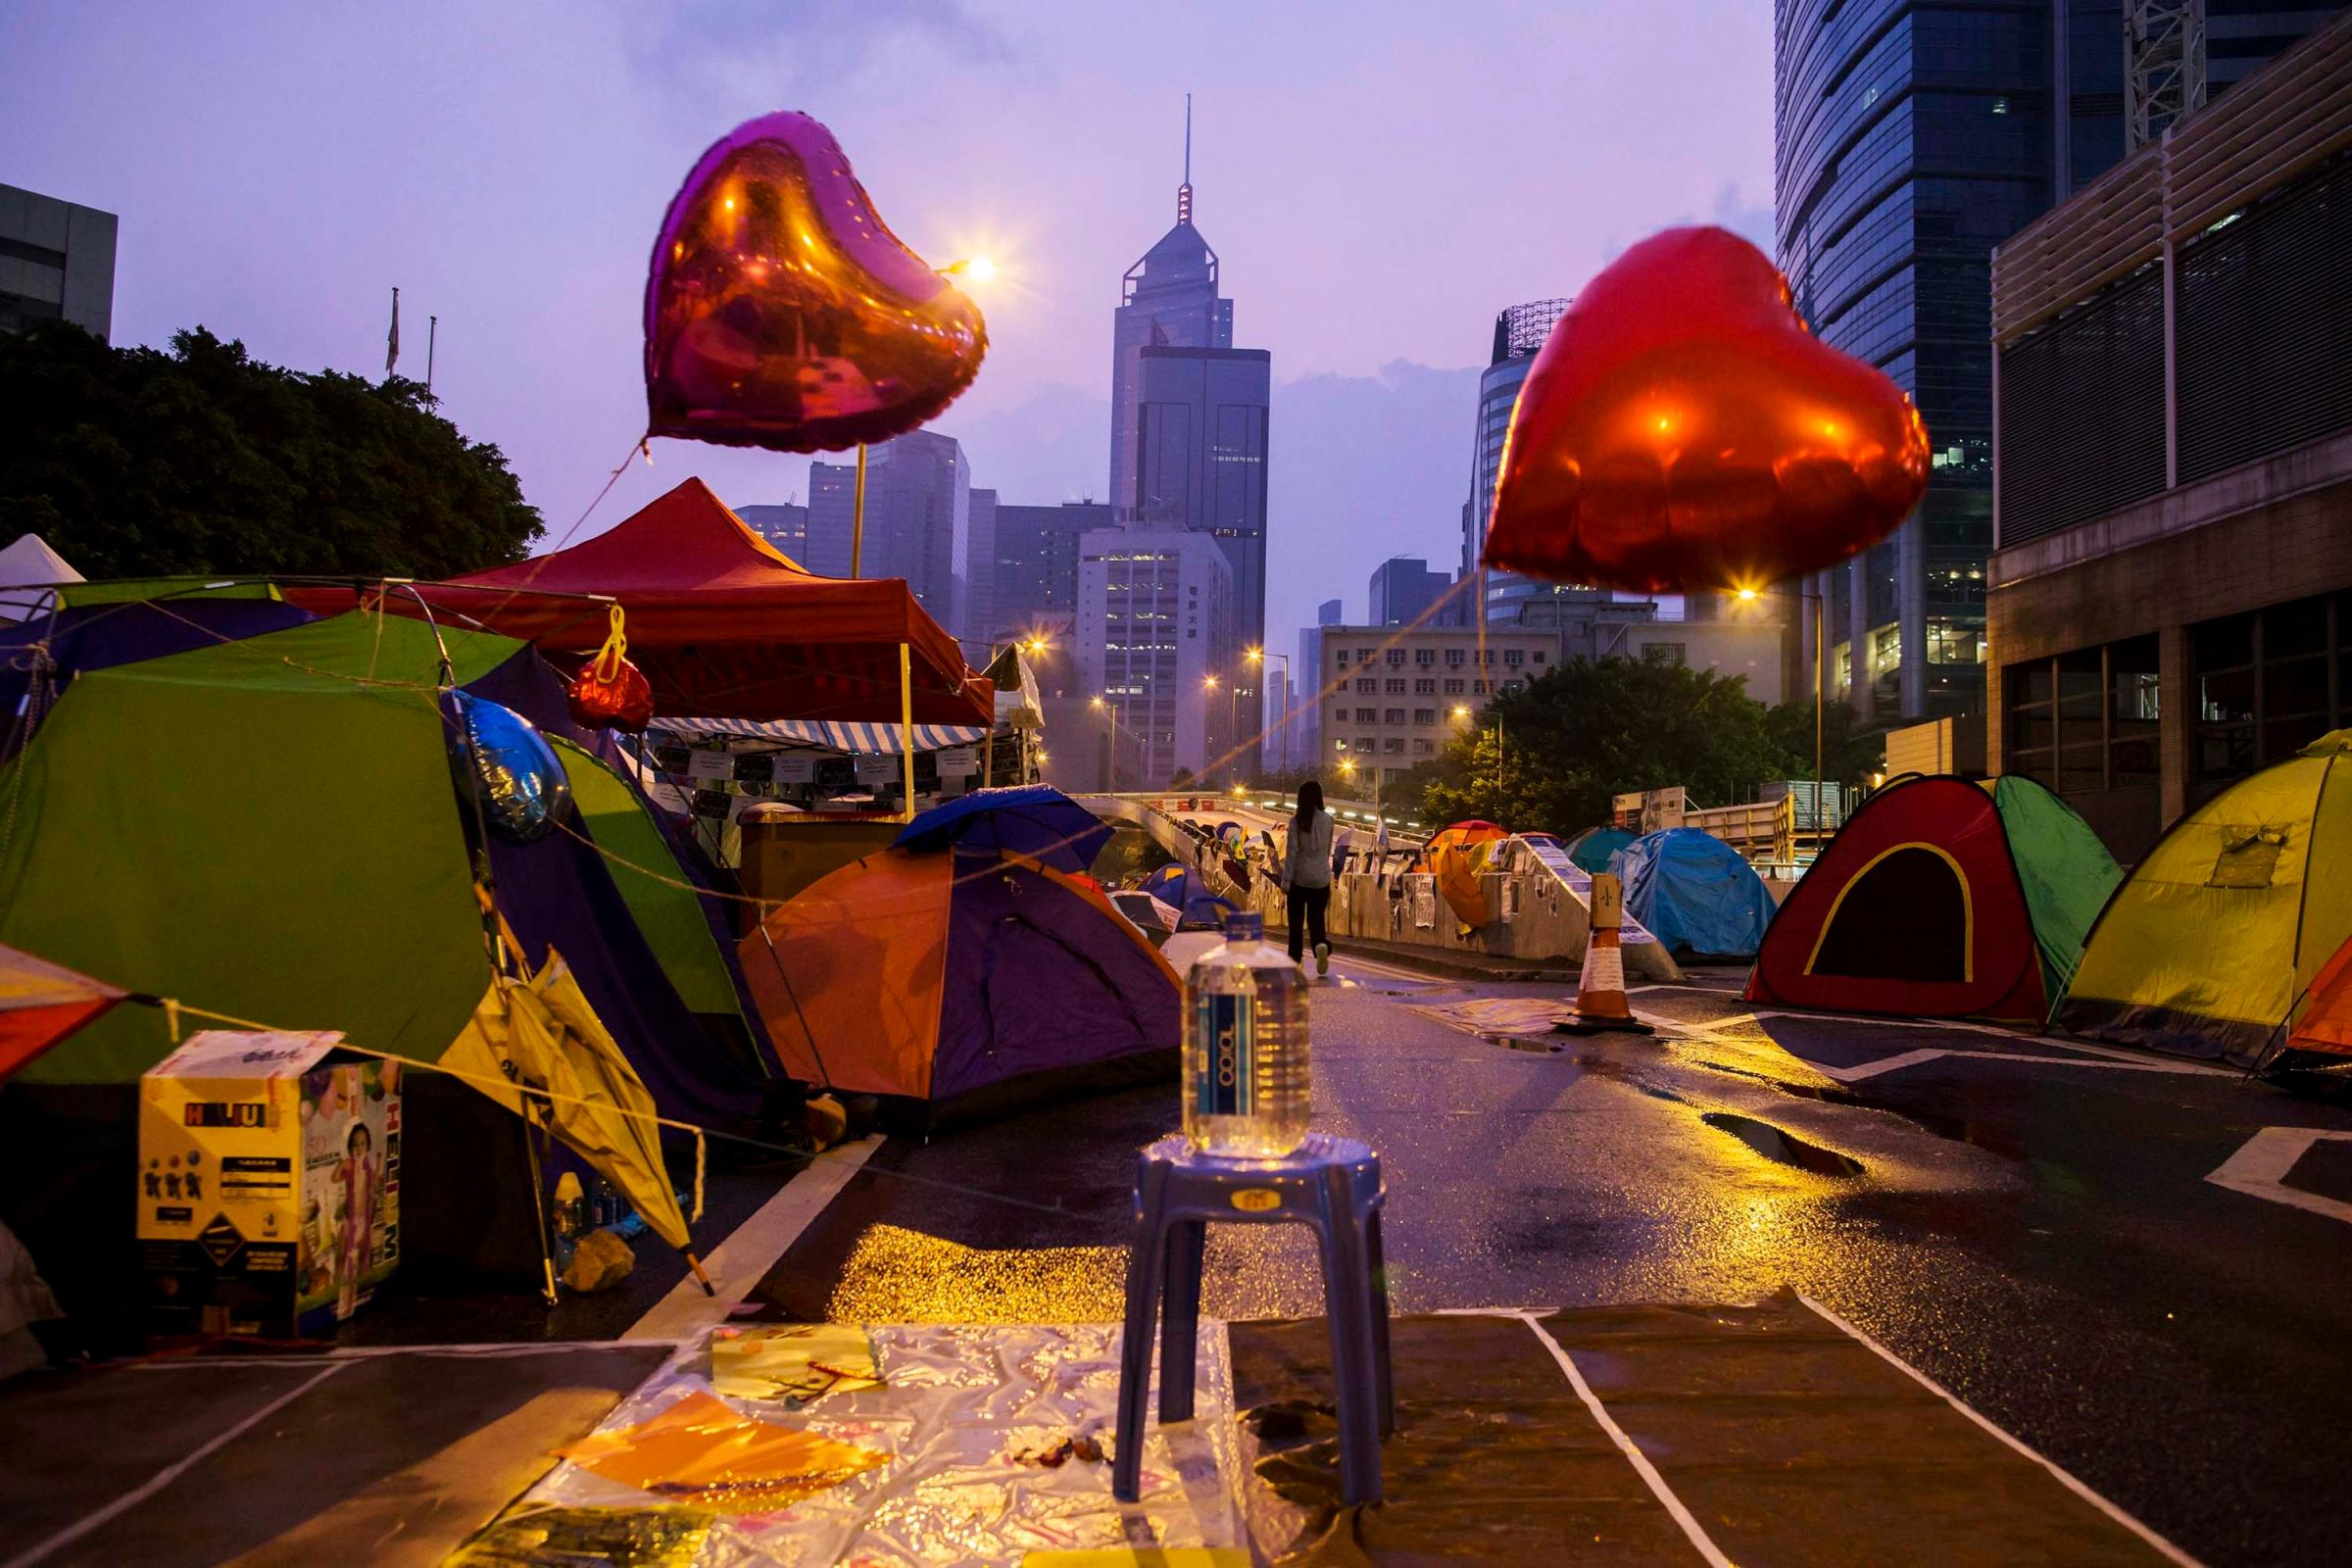 An Occupy Central protester walks past tents before sunrise on a main road leading to the financial Central district in Hong Kong on Oct. 16, 2014.